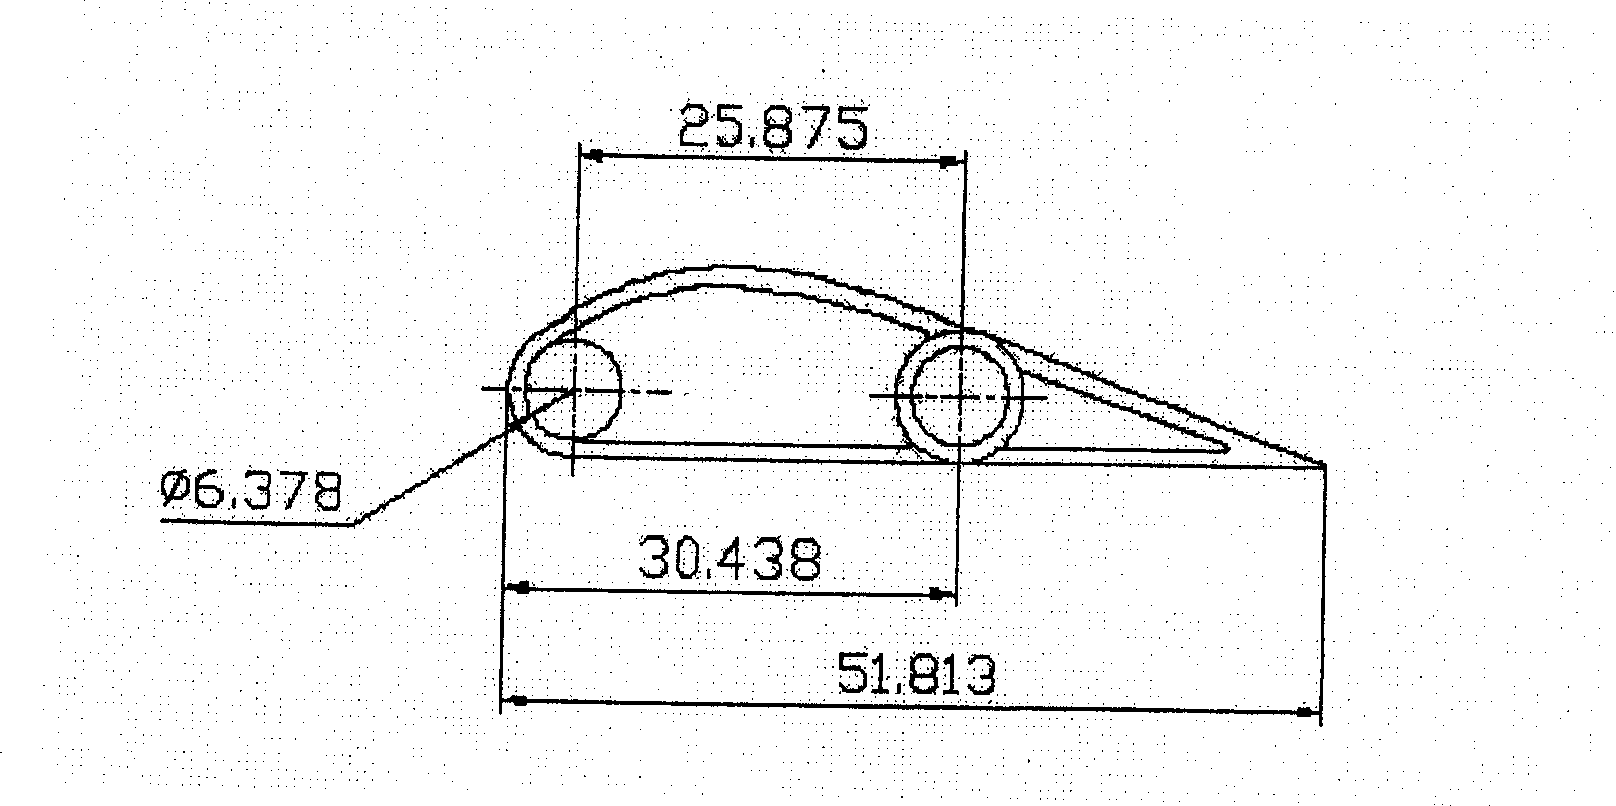 A method for preparing blades of adjustable nozzles used in a turbocharger of engines by using powders as the raw material